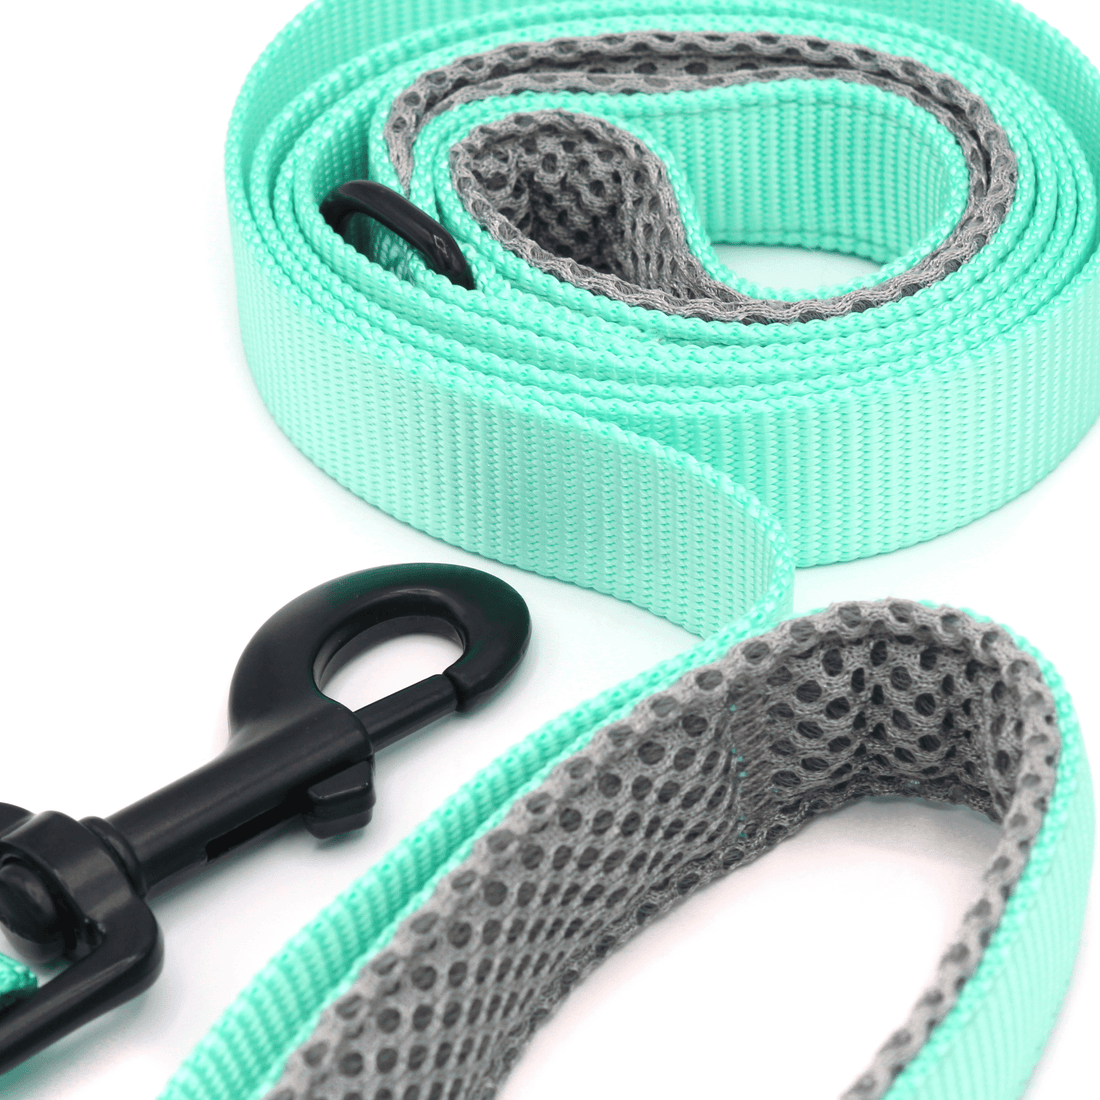 closeup photo of an aqua colored leash, showing the details of the grey padded and mesh handles